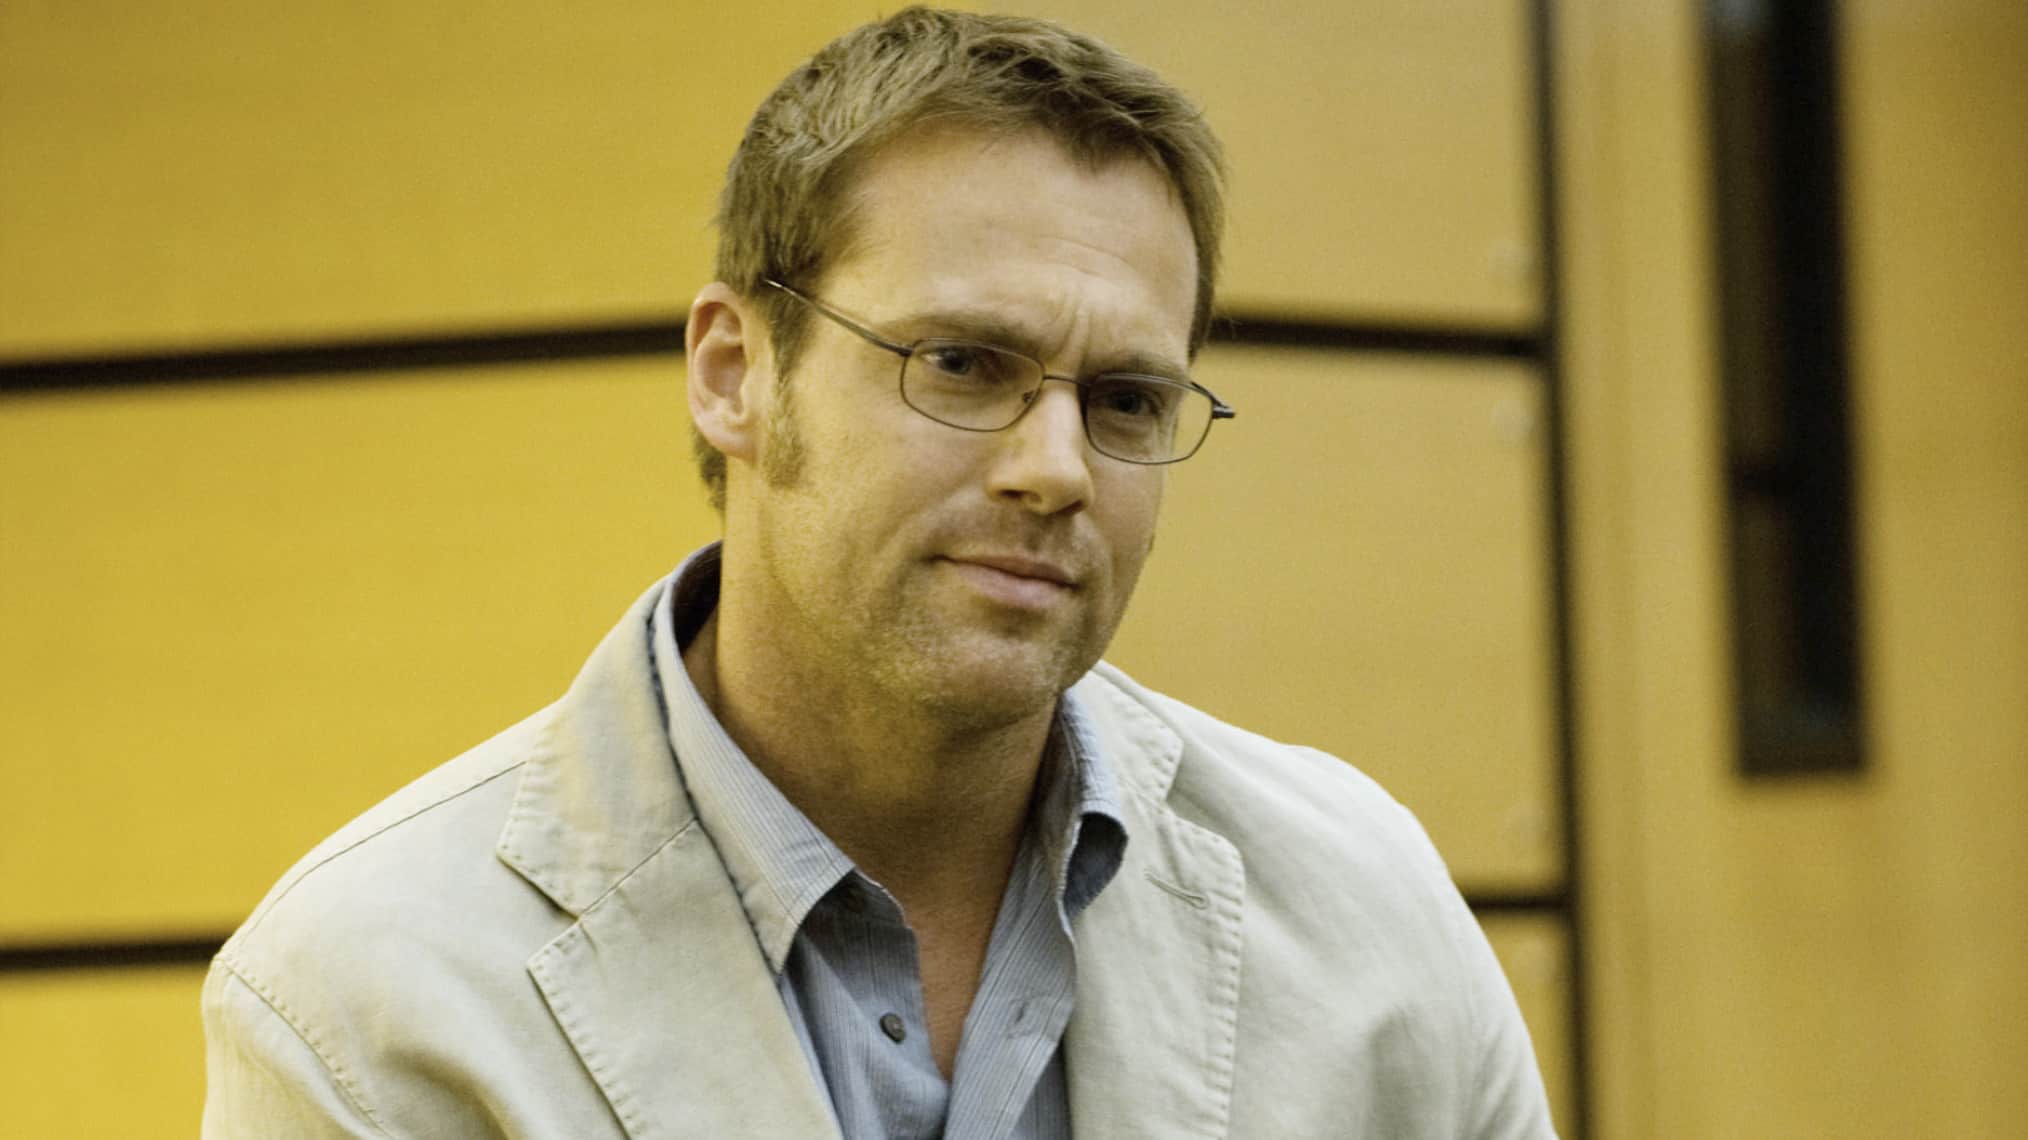 Canadian actor Michael Shanks best known for his role as Daniel Jackson in the long-running military science fiction television series Stargate SG-1.